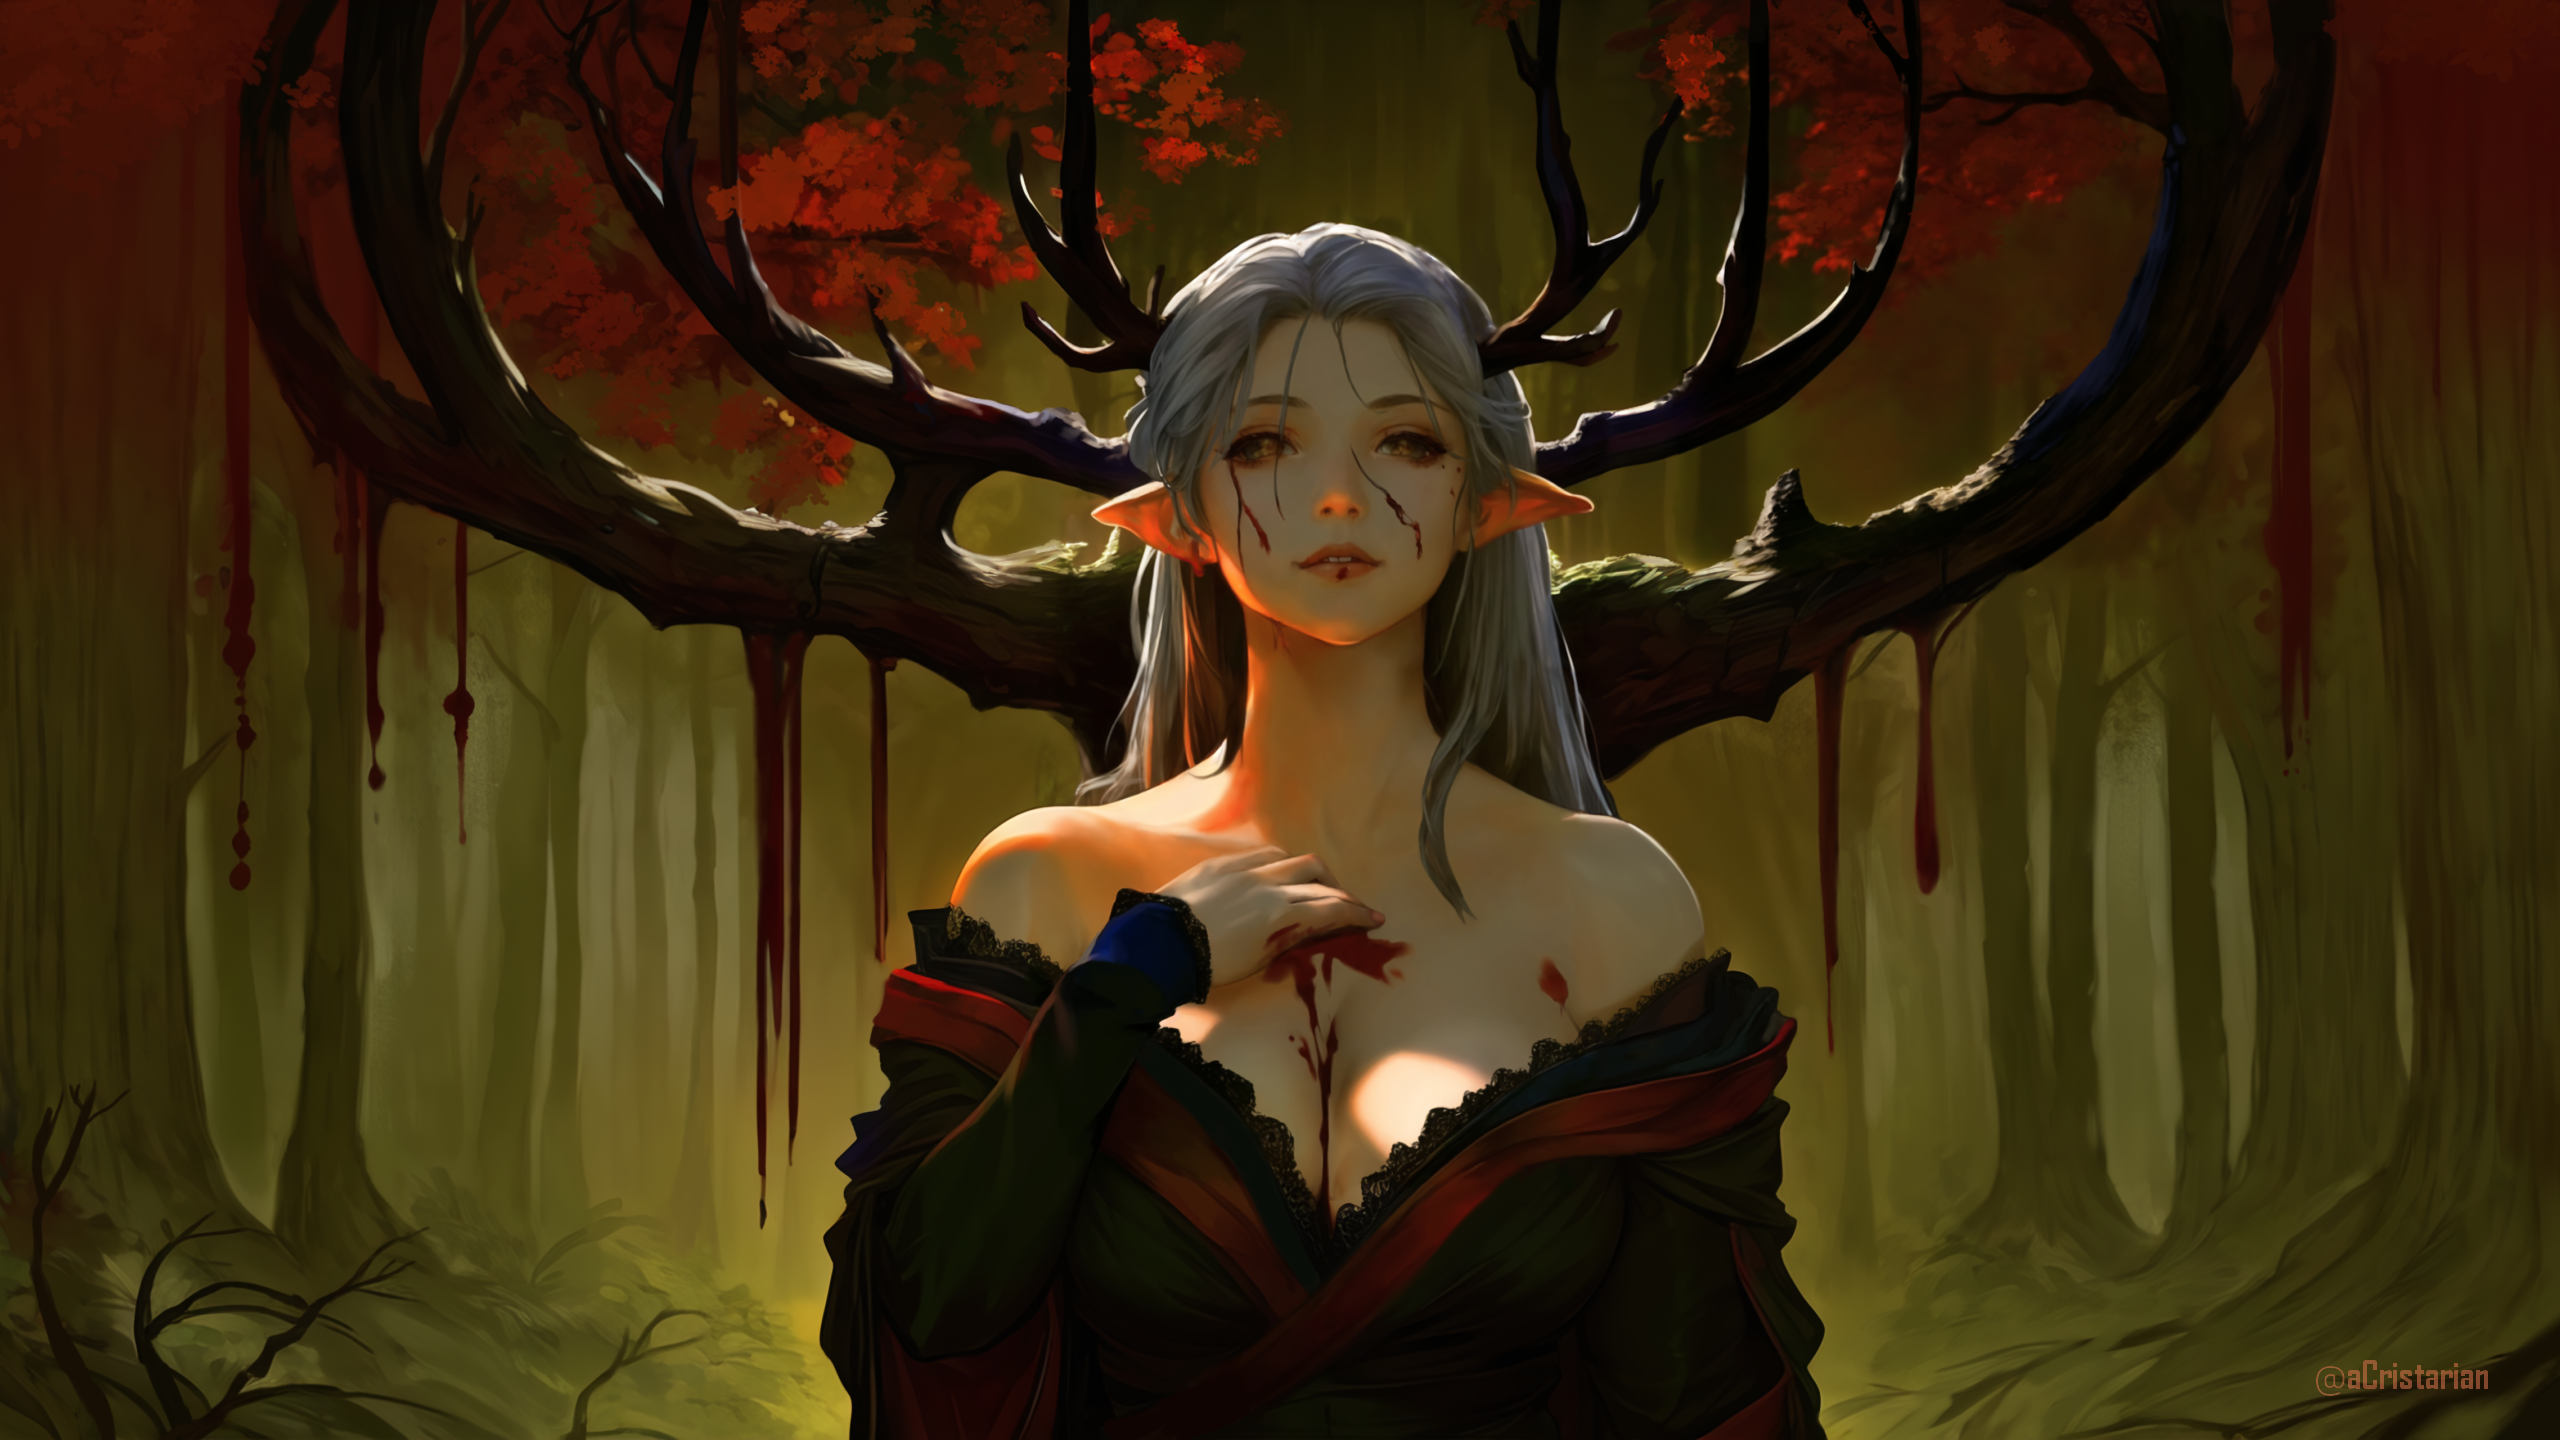 Anime 2560x1440 blood elves bloody boobs creepy elven forest acristarian cleavage pointy ears horns blood fantasy girl fantasy art trees